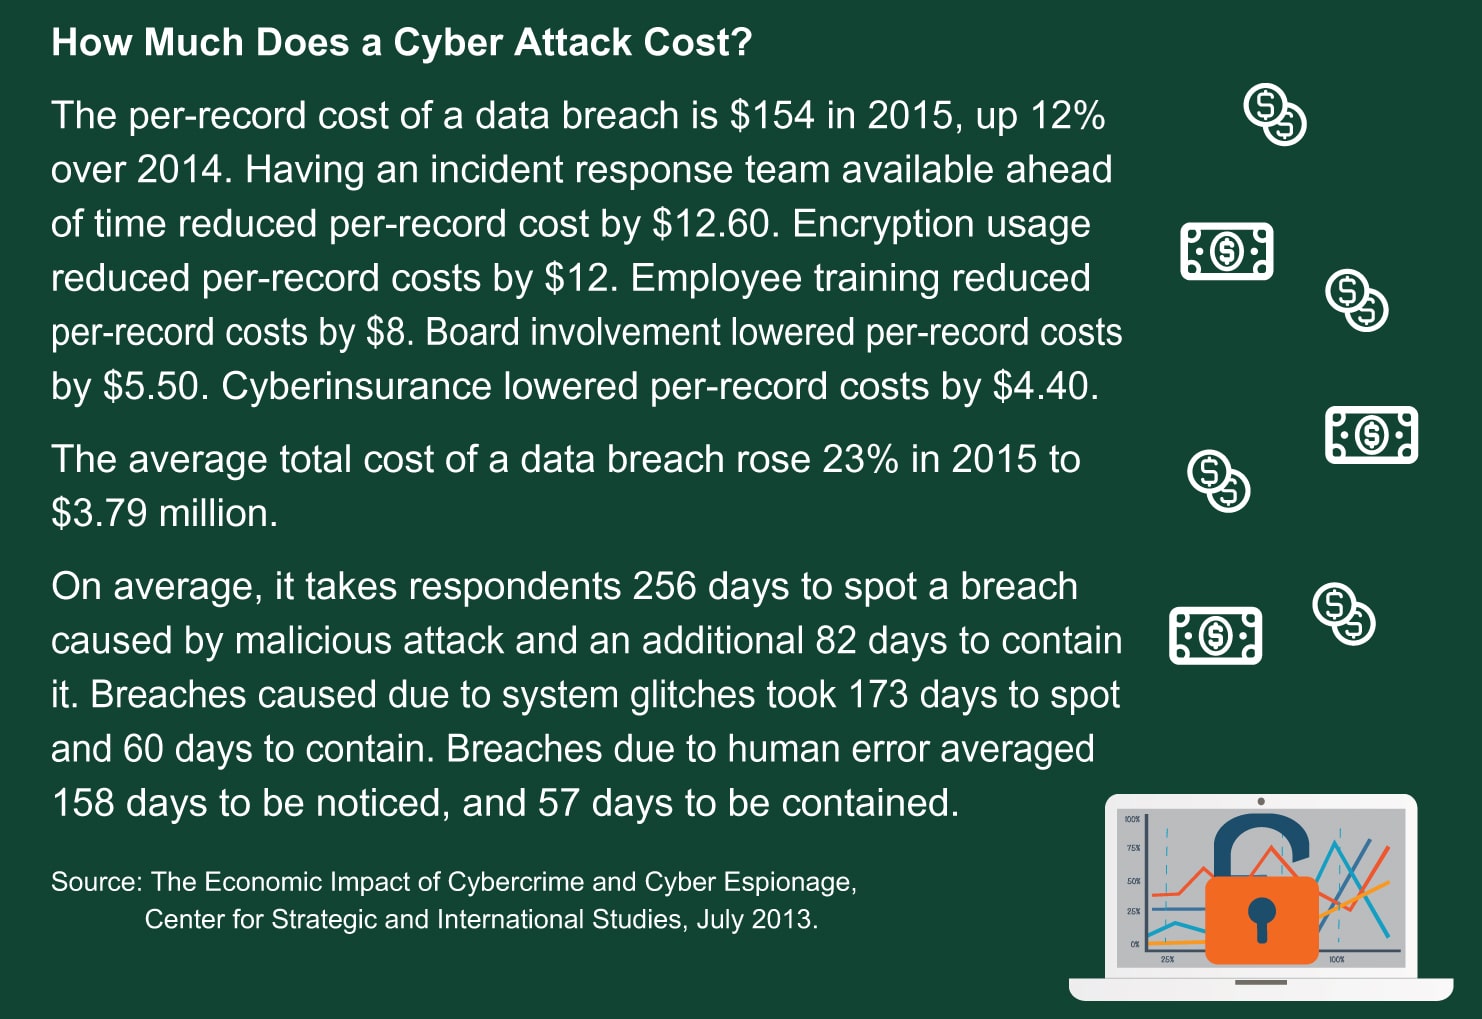 How Much Does a Cyber Attack Cost? The per-record cost of a data breach is $154 in 2015, up 12% over 2014. Having an incident response team available ahead of time reduced per-record cost by $12.60. Encryption usage reduced per-record costs by $12. Employee training reduced per-record costs by $8. Board involvement lowered per-record costs by $5.50. Cyberinsurance lowered per-record costs by $4.40. The average total cost of a data breach rose 23% in 2015 to $3.79 million. On average, it takes respondents 256 days to spot a breach caused by malicious attack and an additional 82 days to contain it. Breaches caused due to system glitches took 173 days to spot and 60 days to contain. Breaches due to human error averaged 158 days to be noticed, and 57 days to be contained.